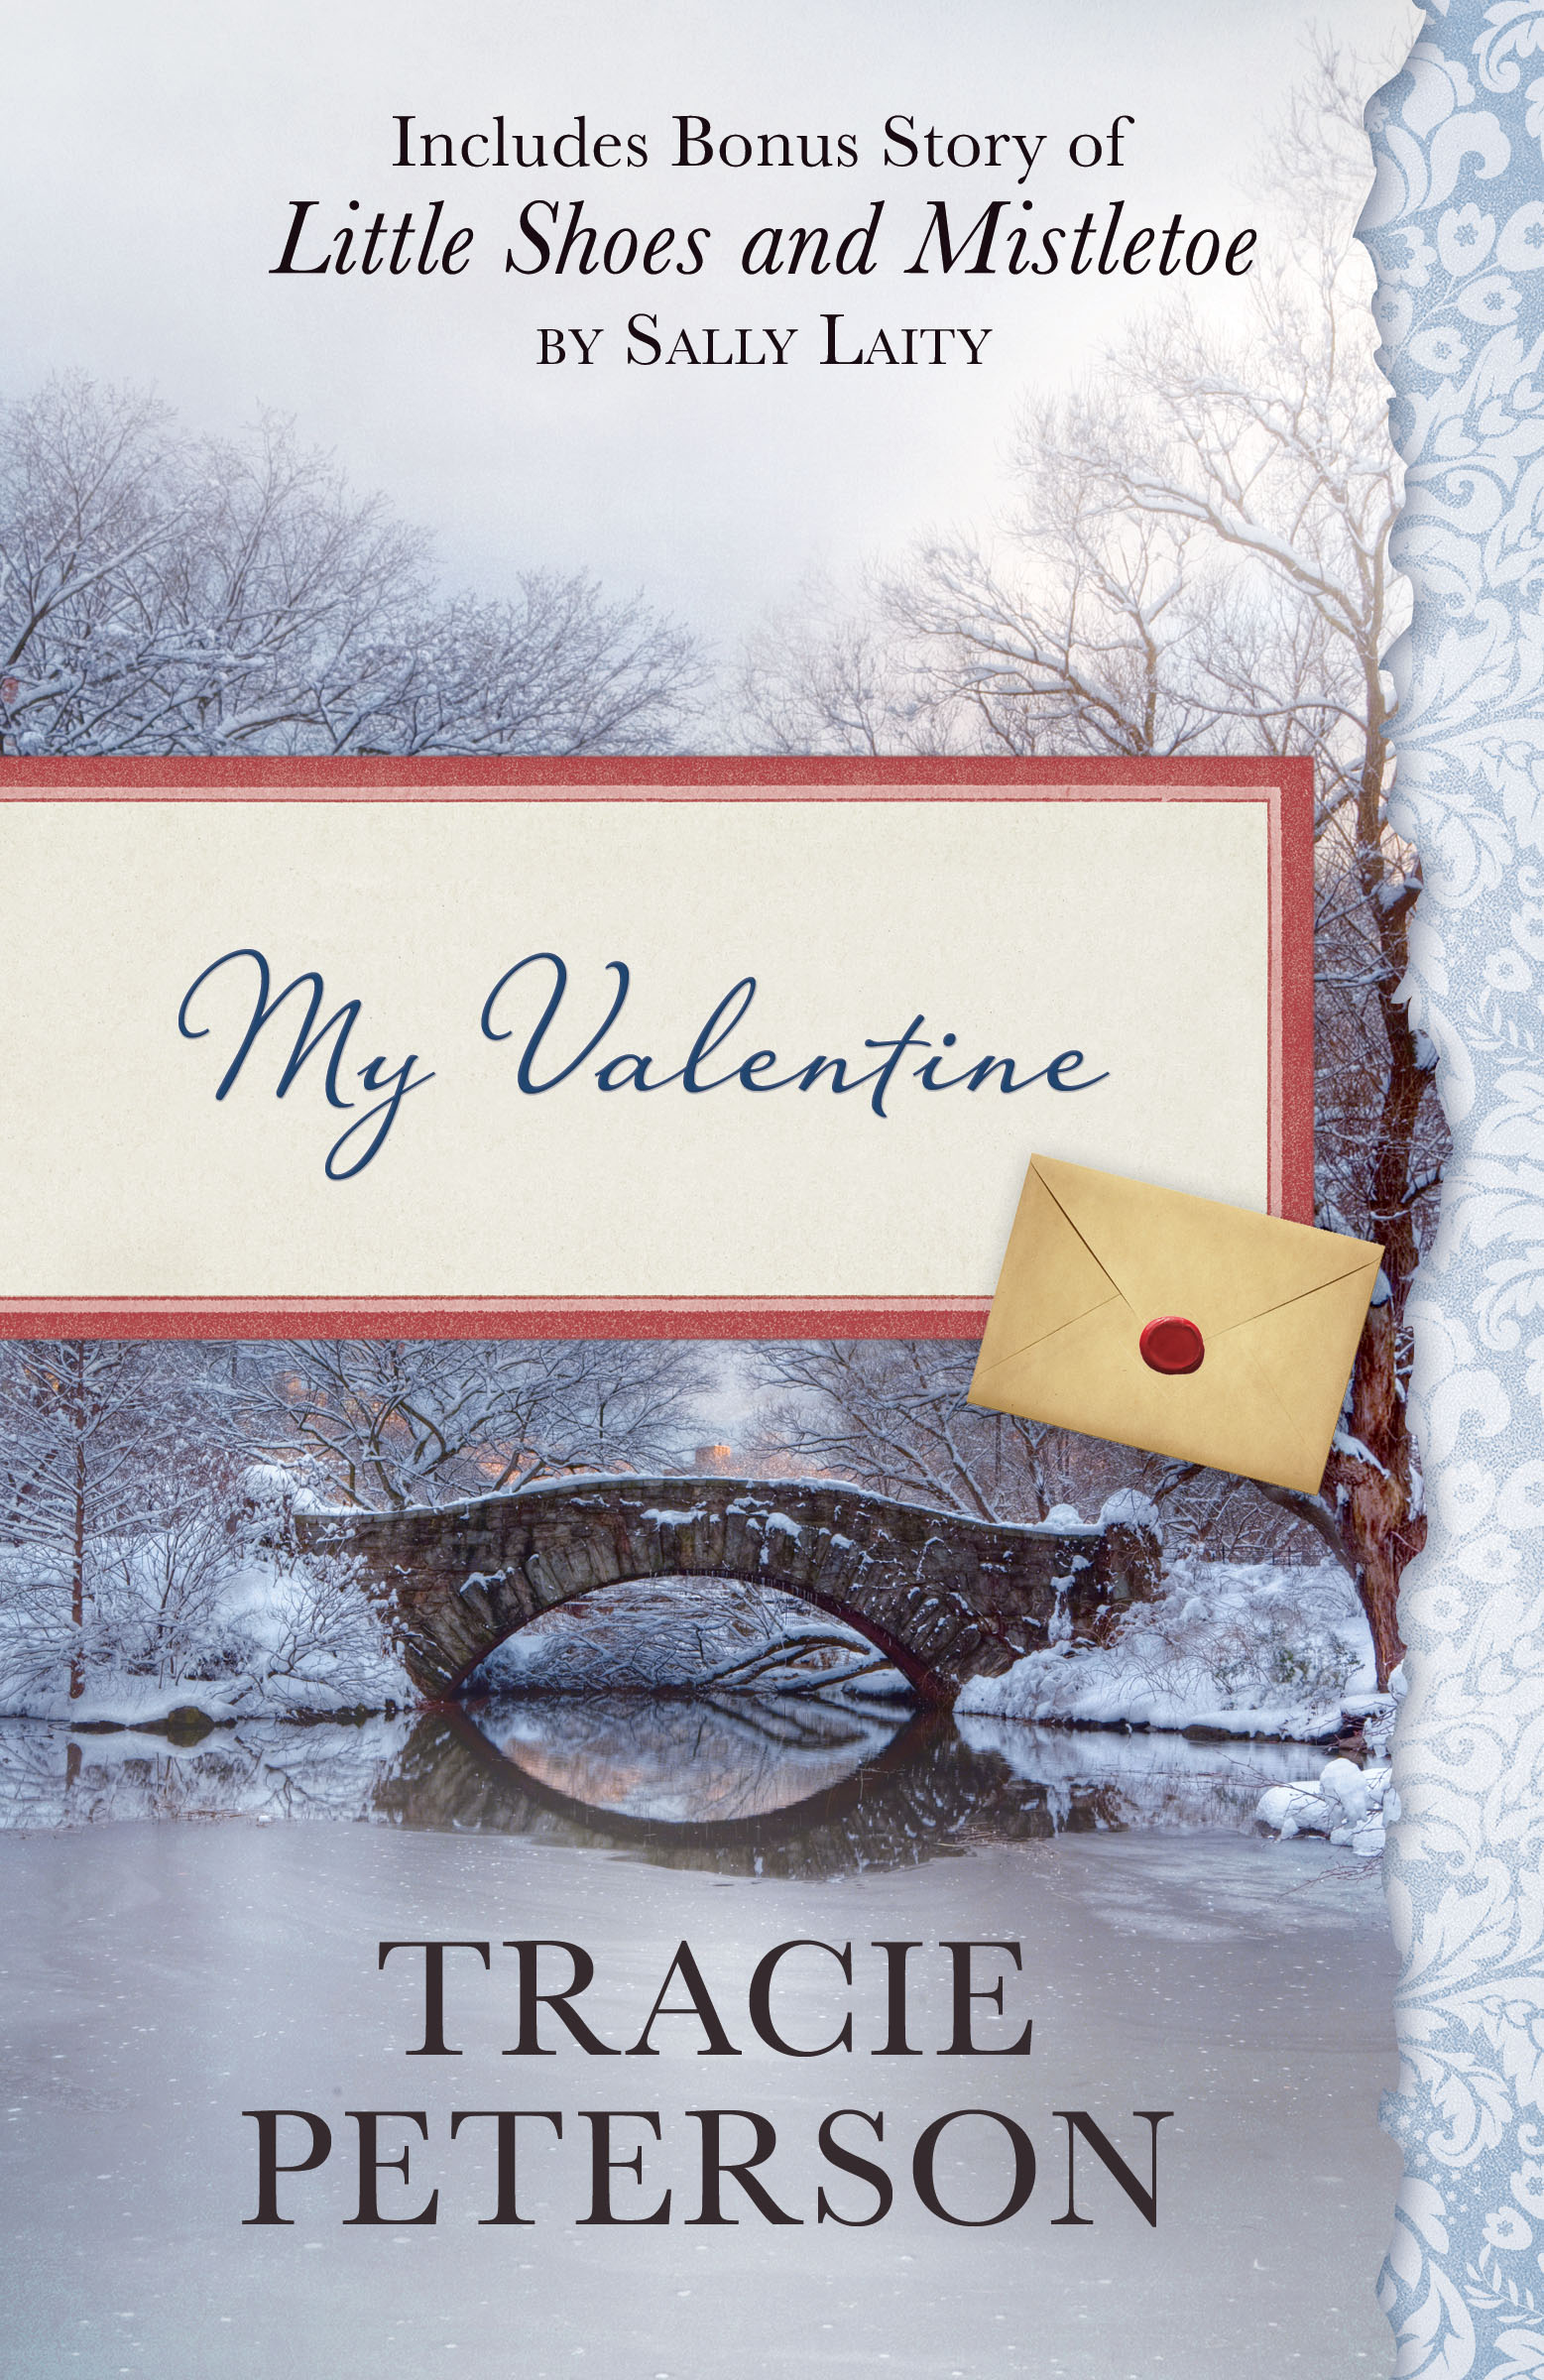 Image de couverture de My Valentine [electronic resource] : Also Includes Bonus Story of Little Shoes and Mistletoe by Sally Laity